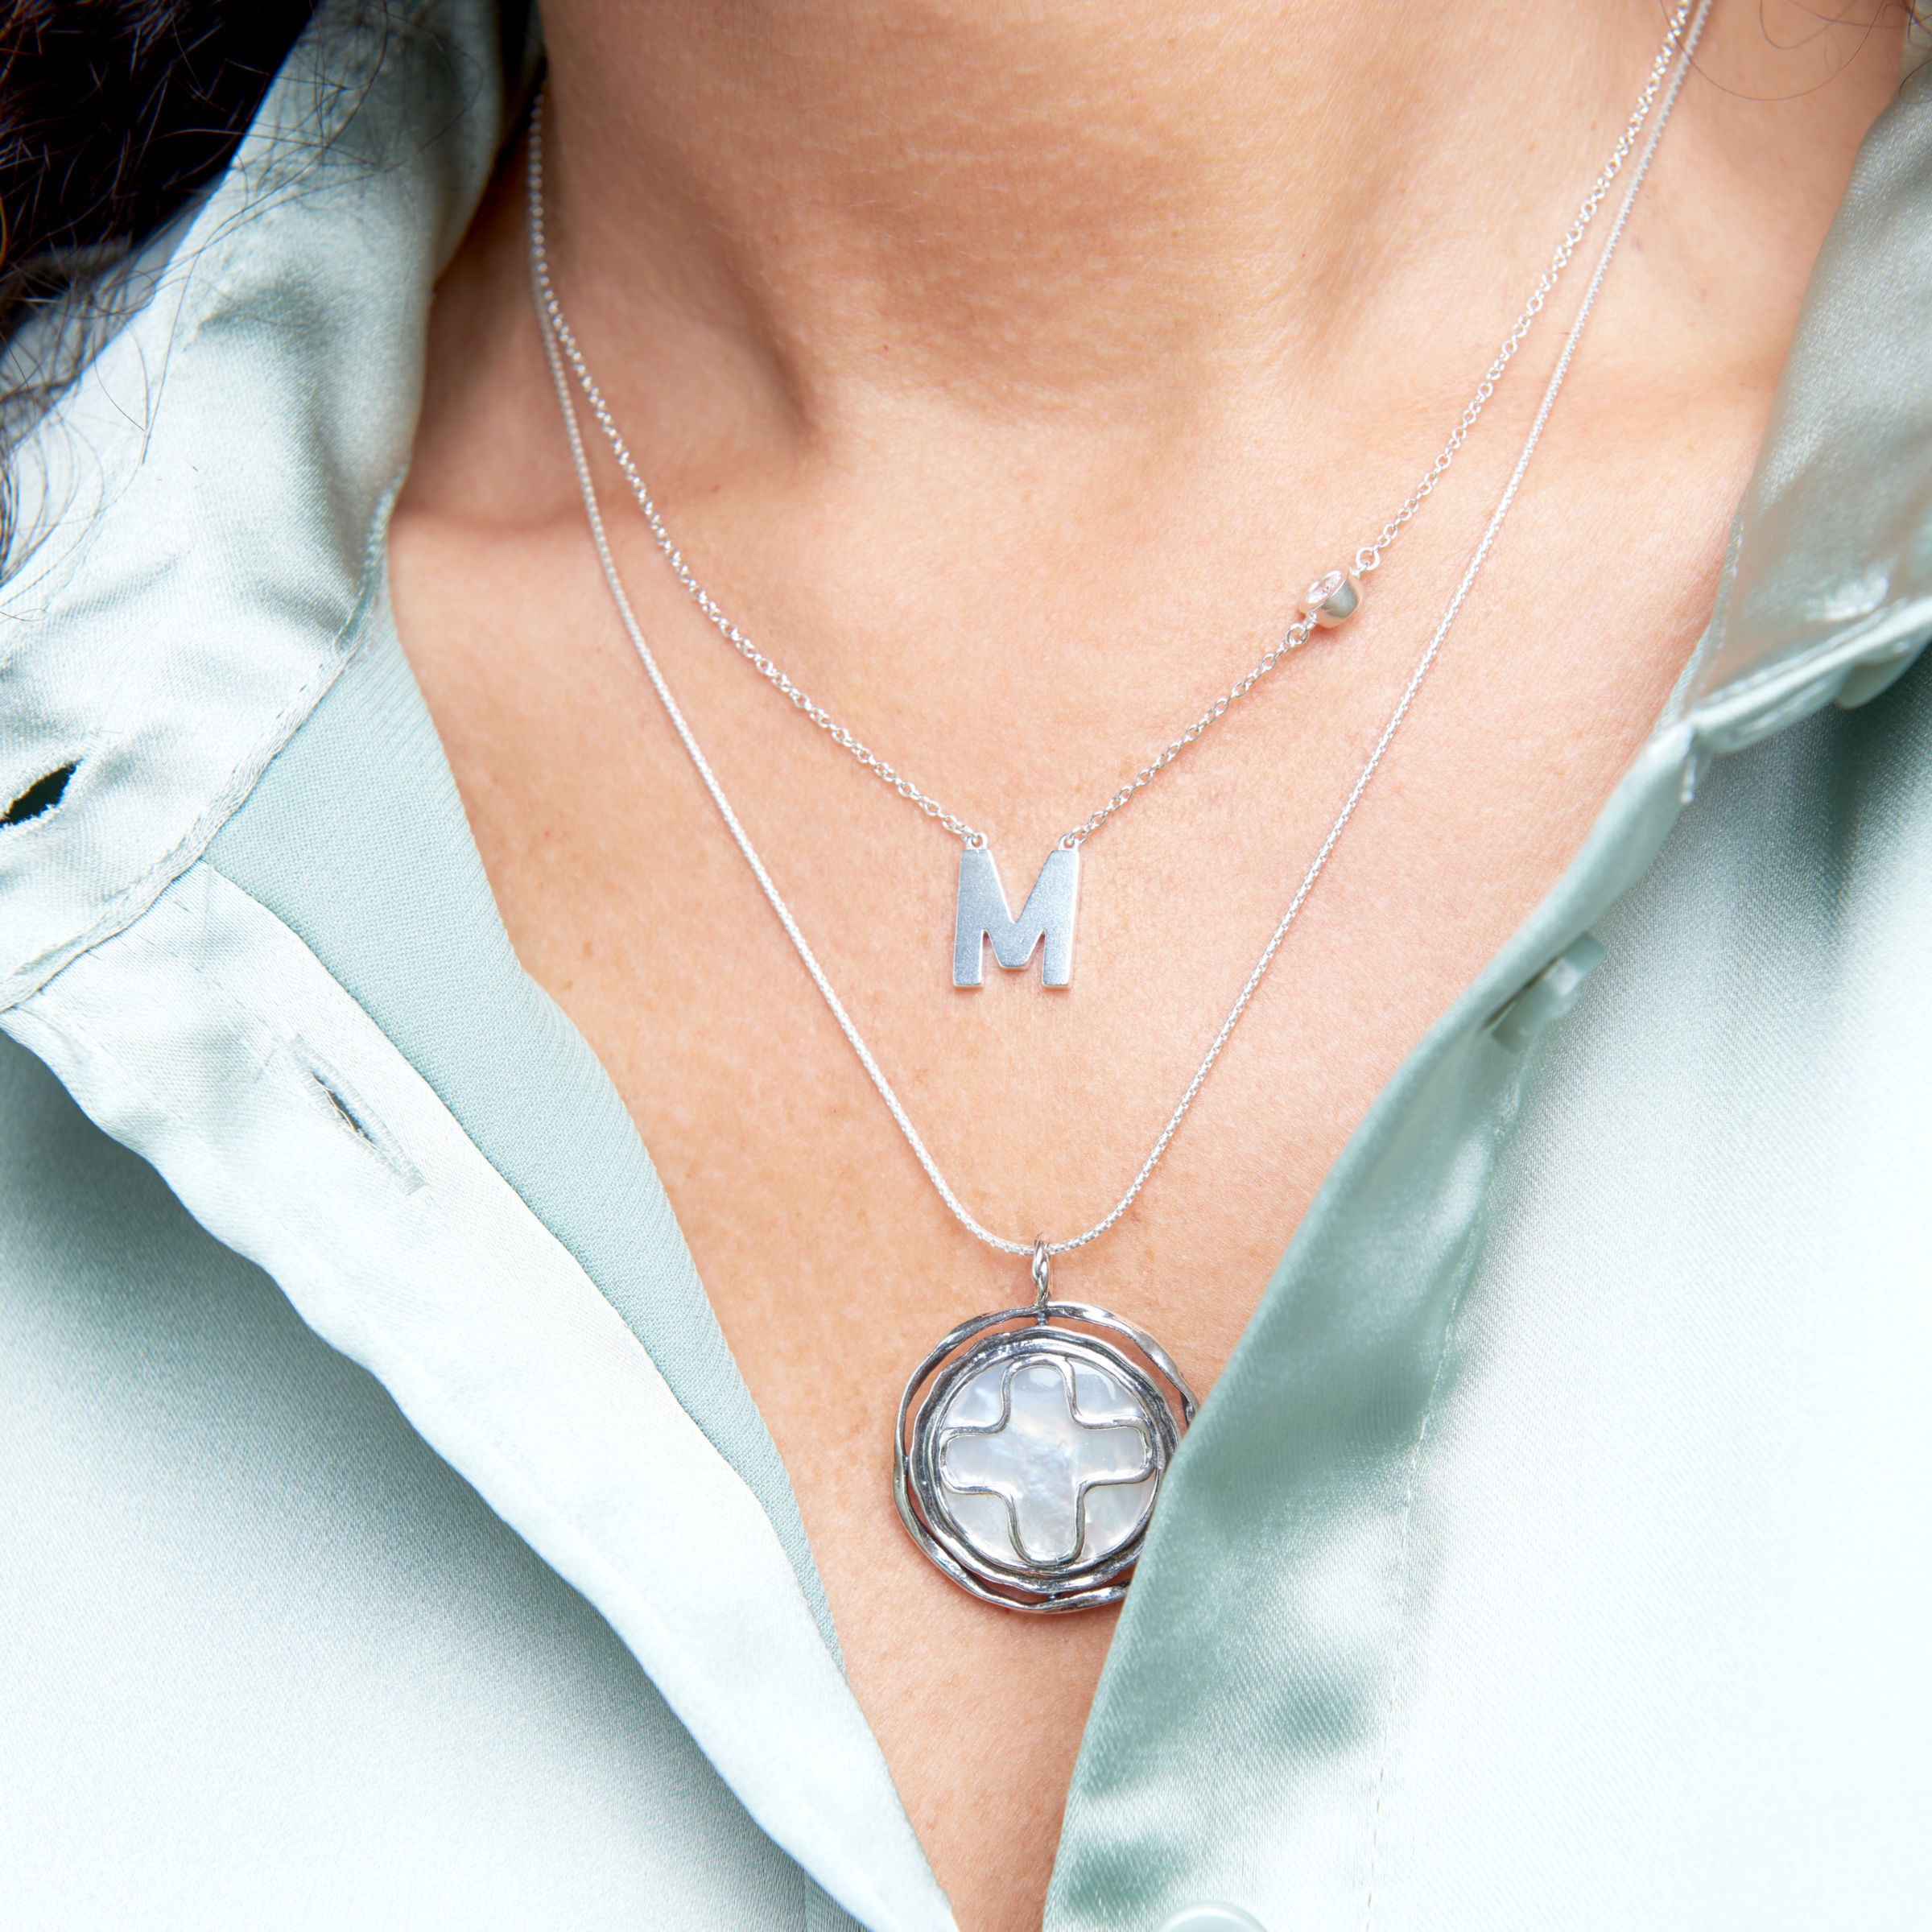 Hidden Meaning Necklace